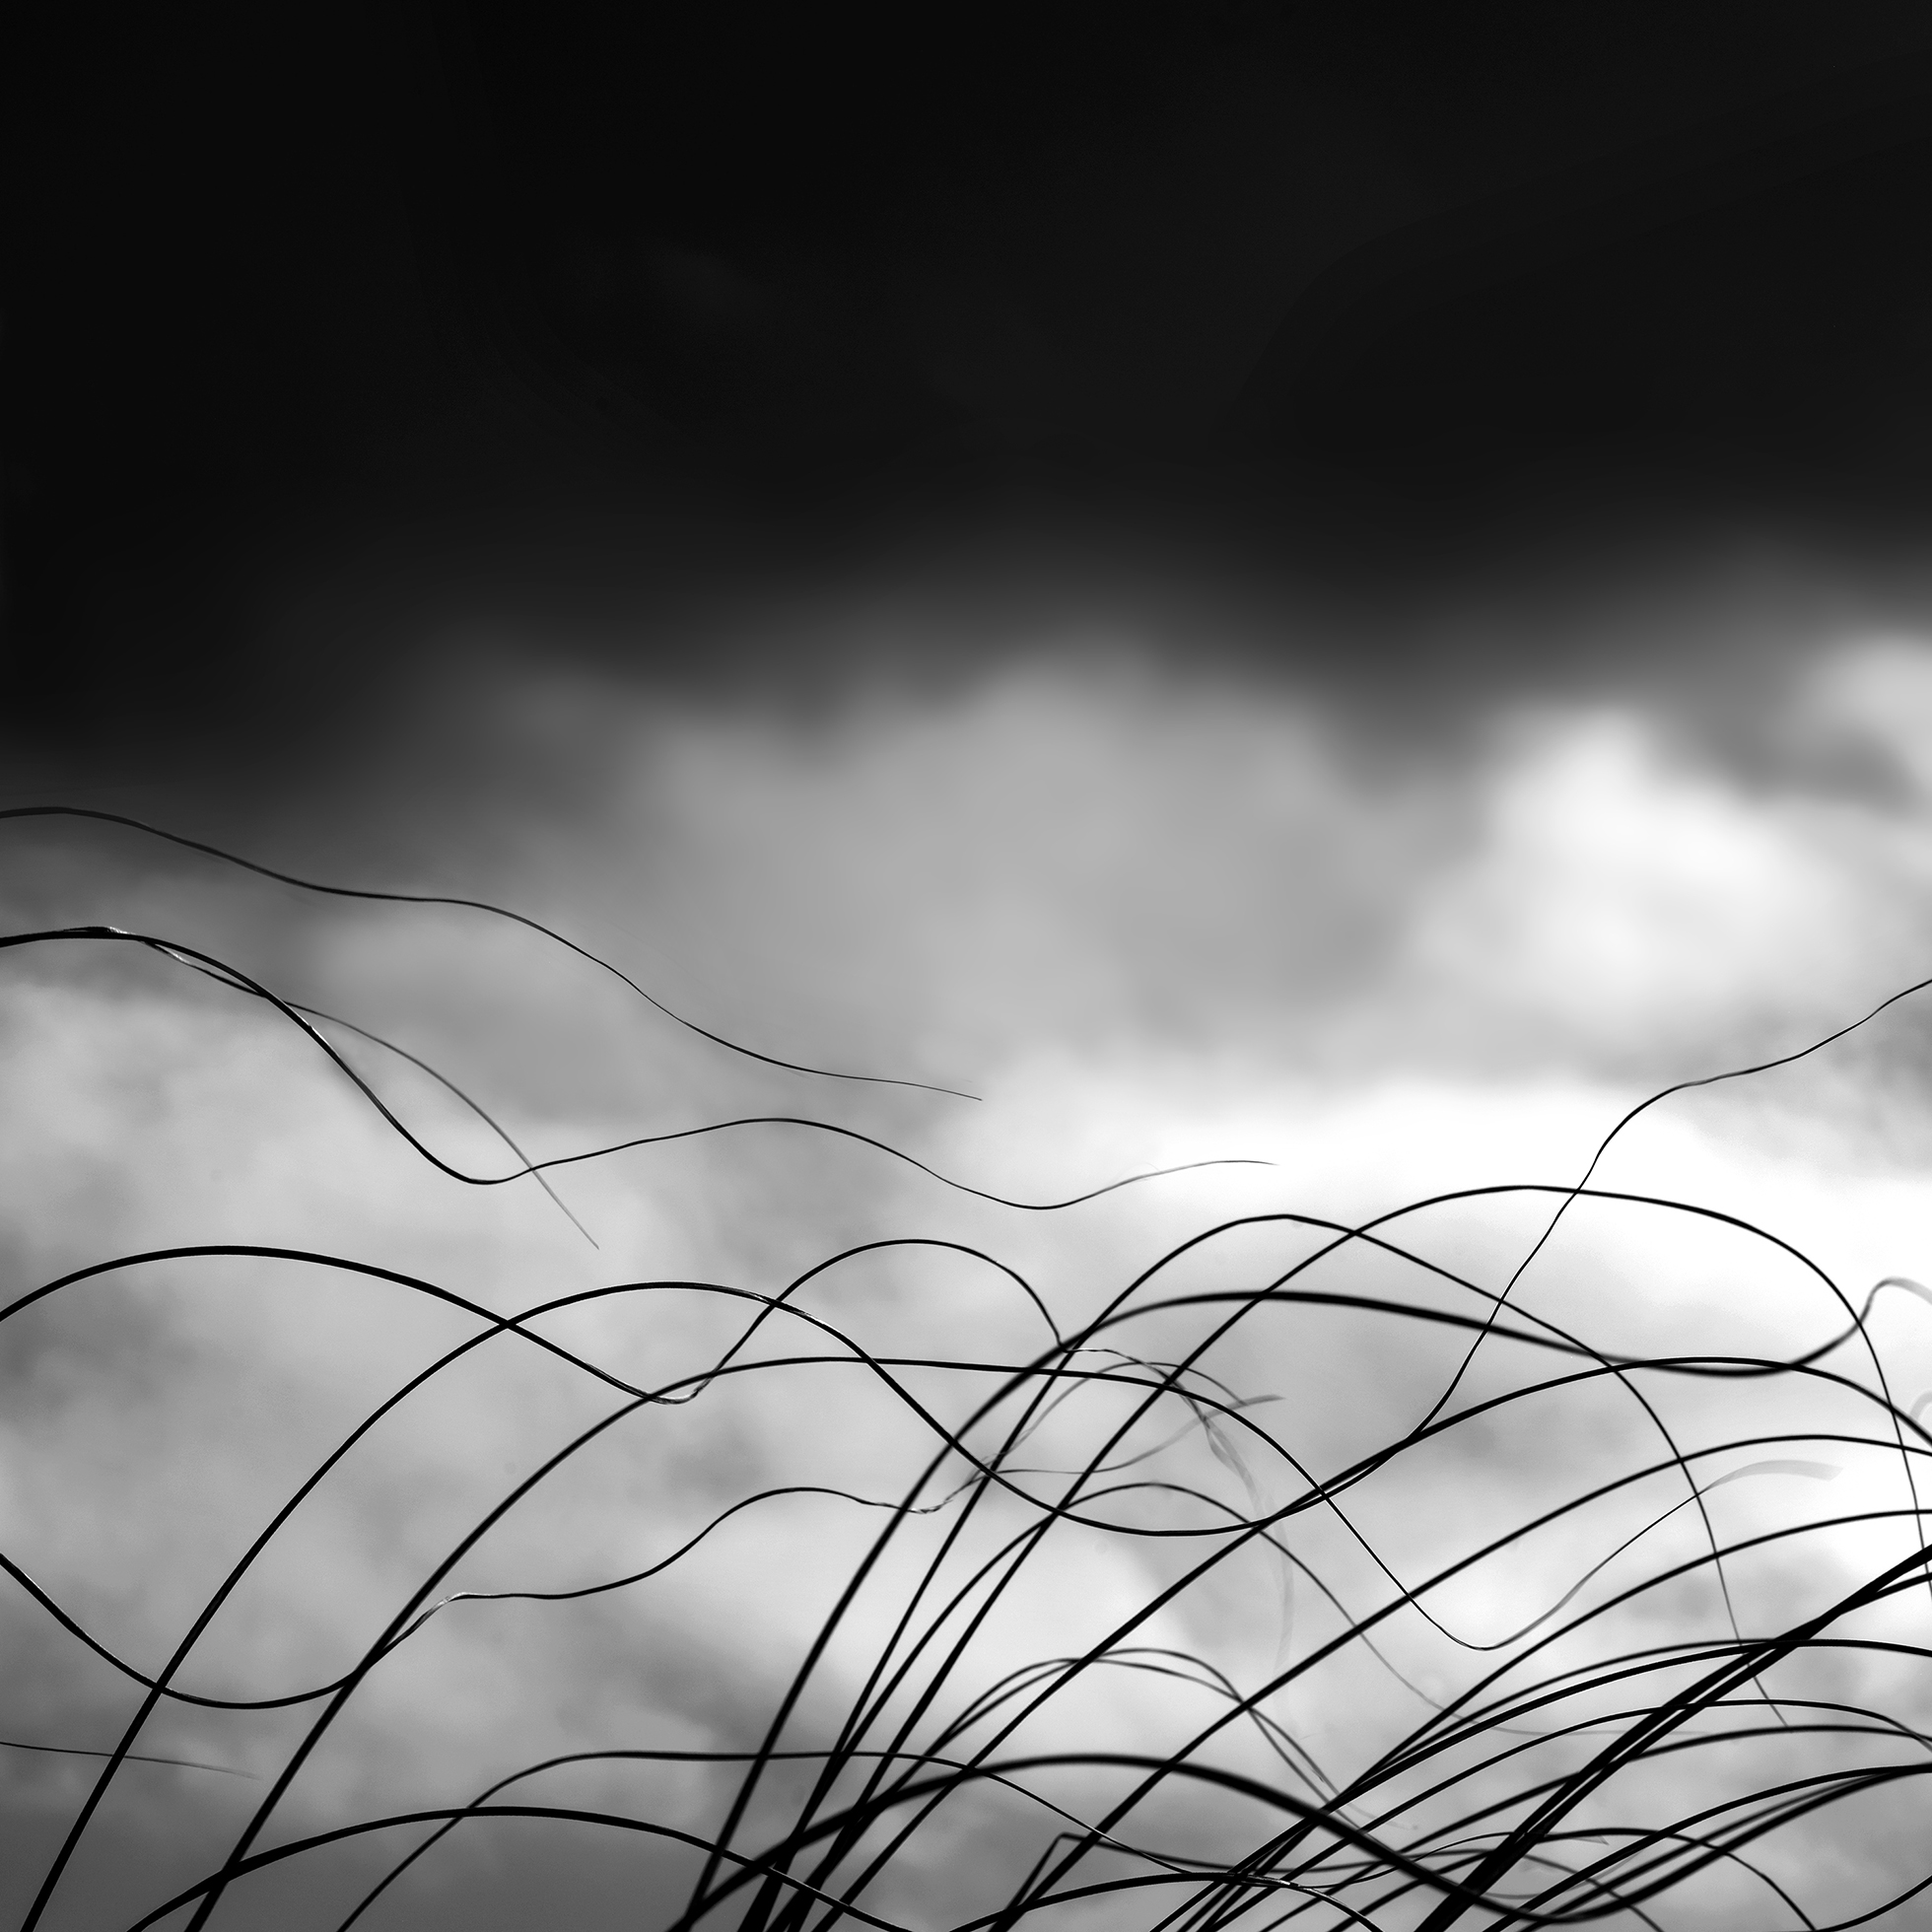 The tops of wavy blades of beach grass on Rockaway Beach in Oregon in 2018 pop up from the bottom of the photo against white clouds under a dark sky.